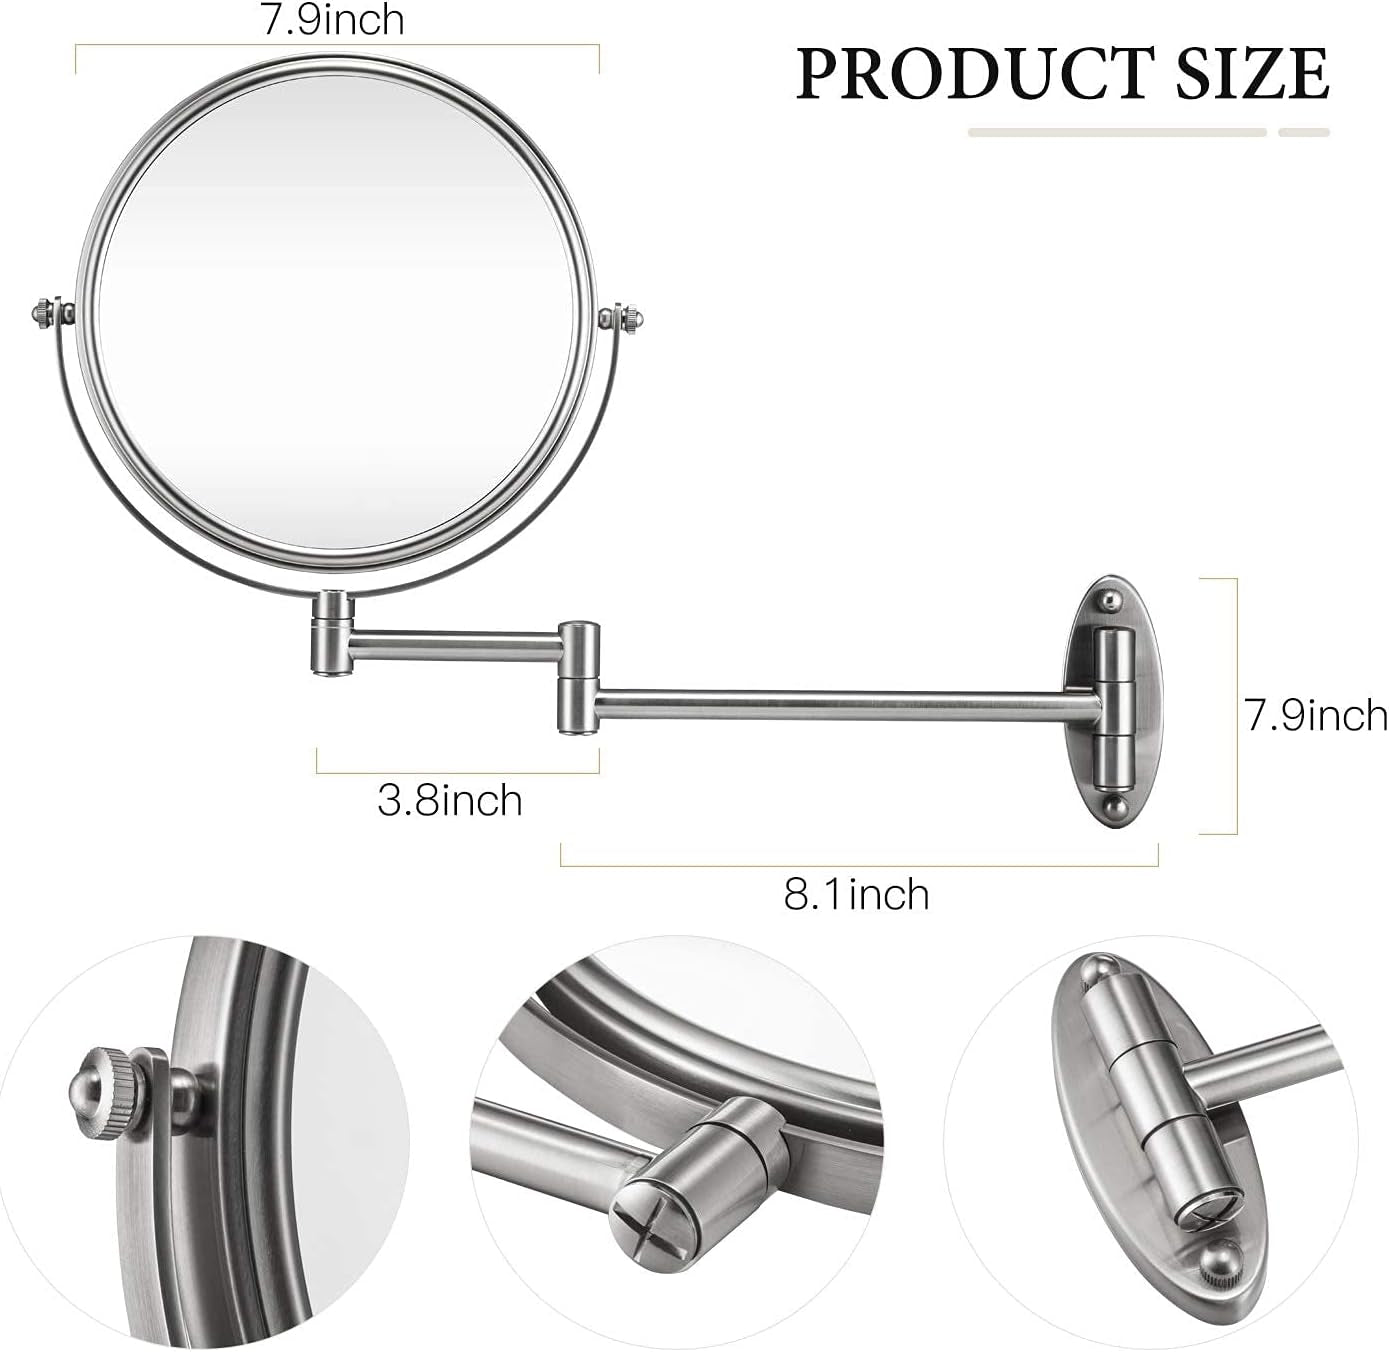 10X Wall Mounted Makeup Mirror - Double Sided Magnifying Makeup Mirror for Bathroom, 8 Inch Extension Brushed Nickel Mirror Finished